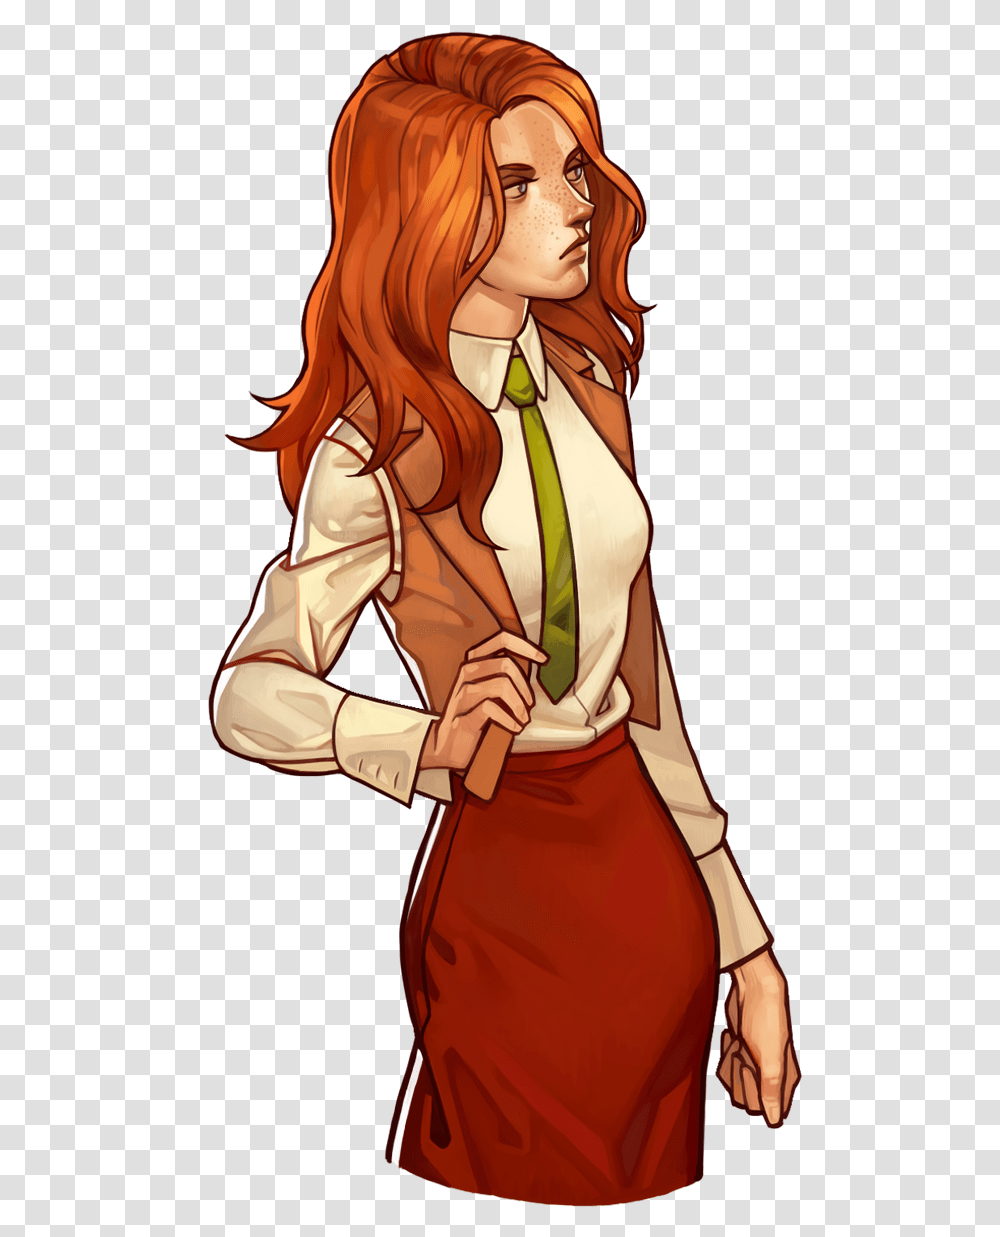 Einsbern Bioshock Art Game Characters With Red Hair, Manga, Comics, Book, Person Transparent Png